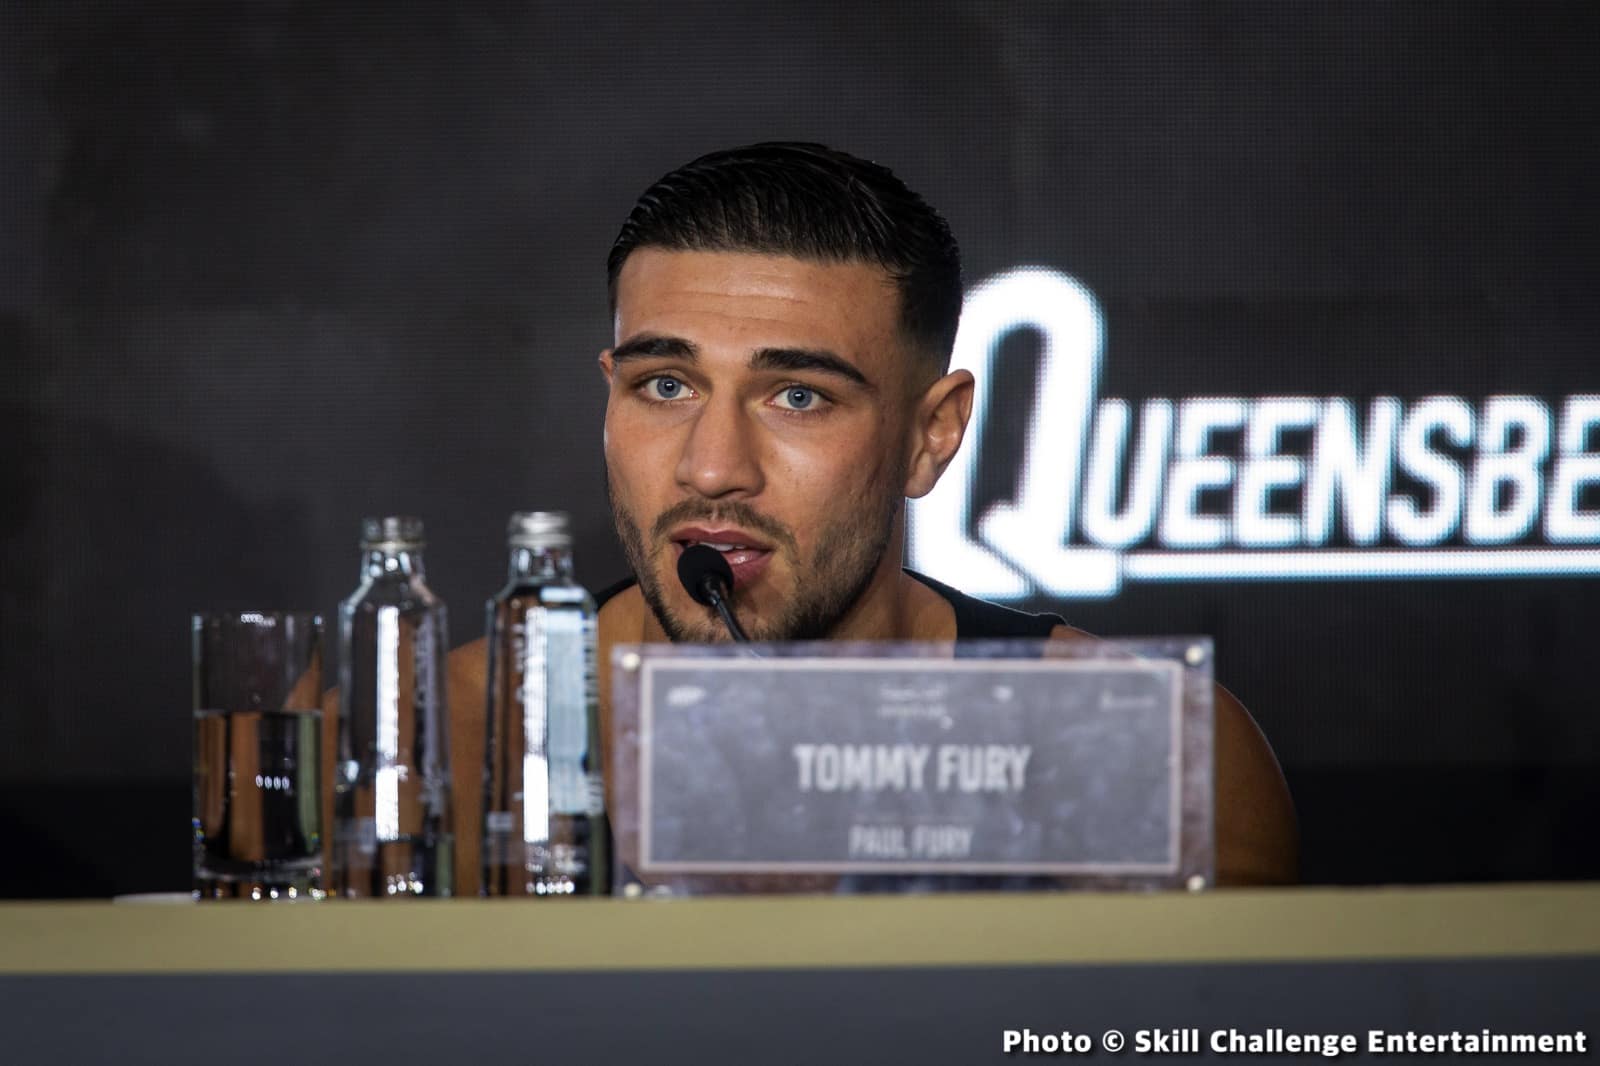 Image: Tommy Fury now ranked #39 by WBC after win over YouTuber Jake Paul